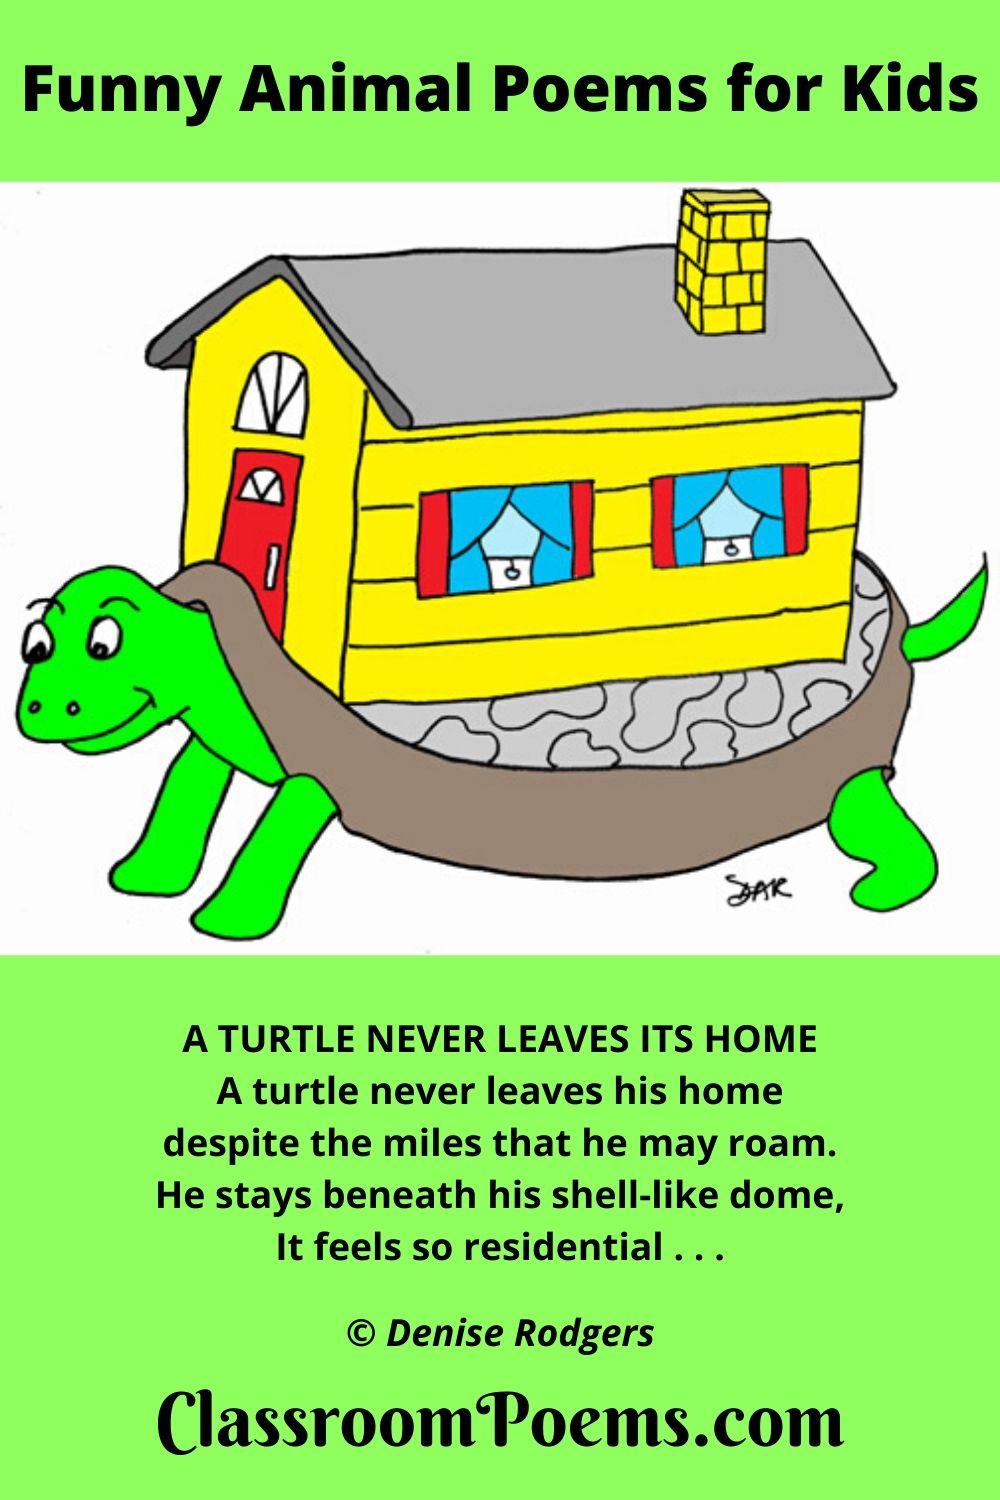 Turtle with house on back. A Turtle Never Leaves His Home, a funny animal poem by Denise Rodgers on ClassroomPoems.com.